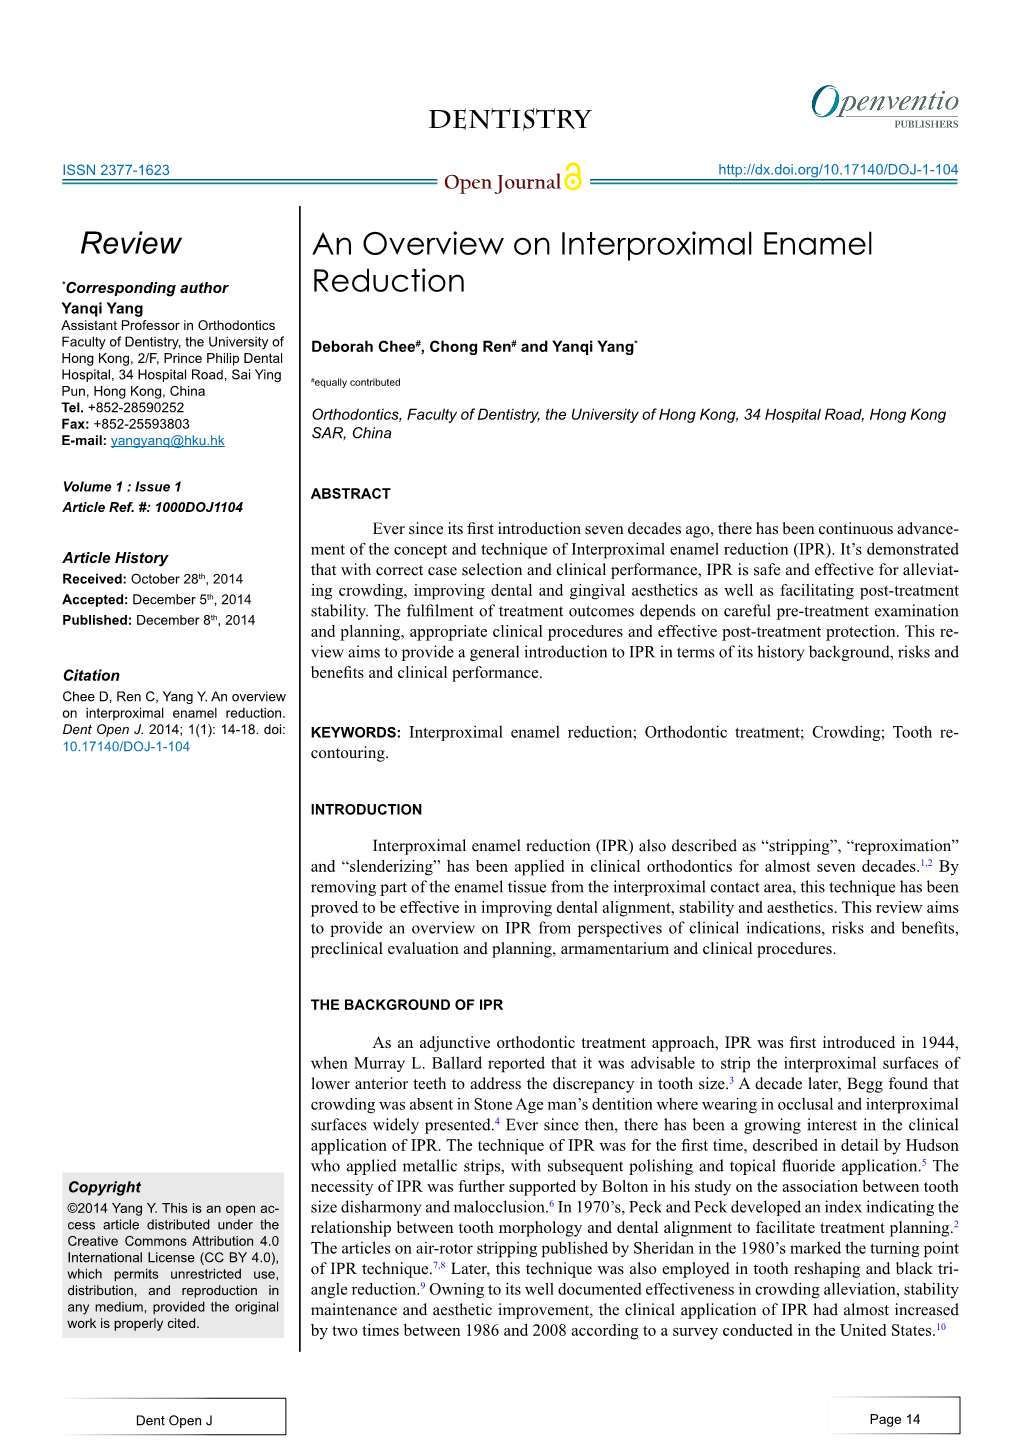 An Overview on Interproximal Enamel Reduction